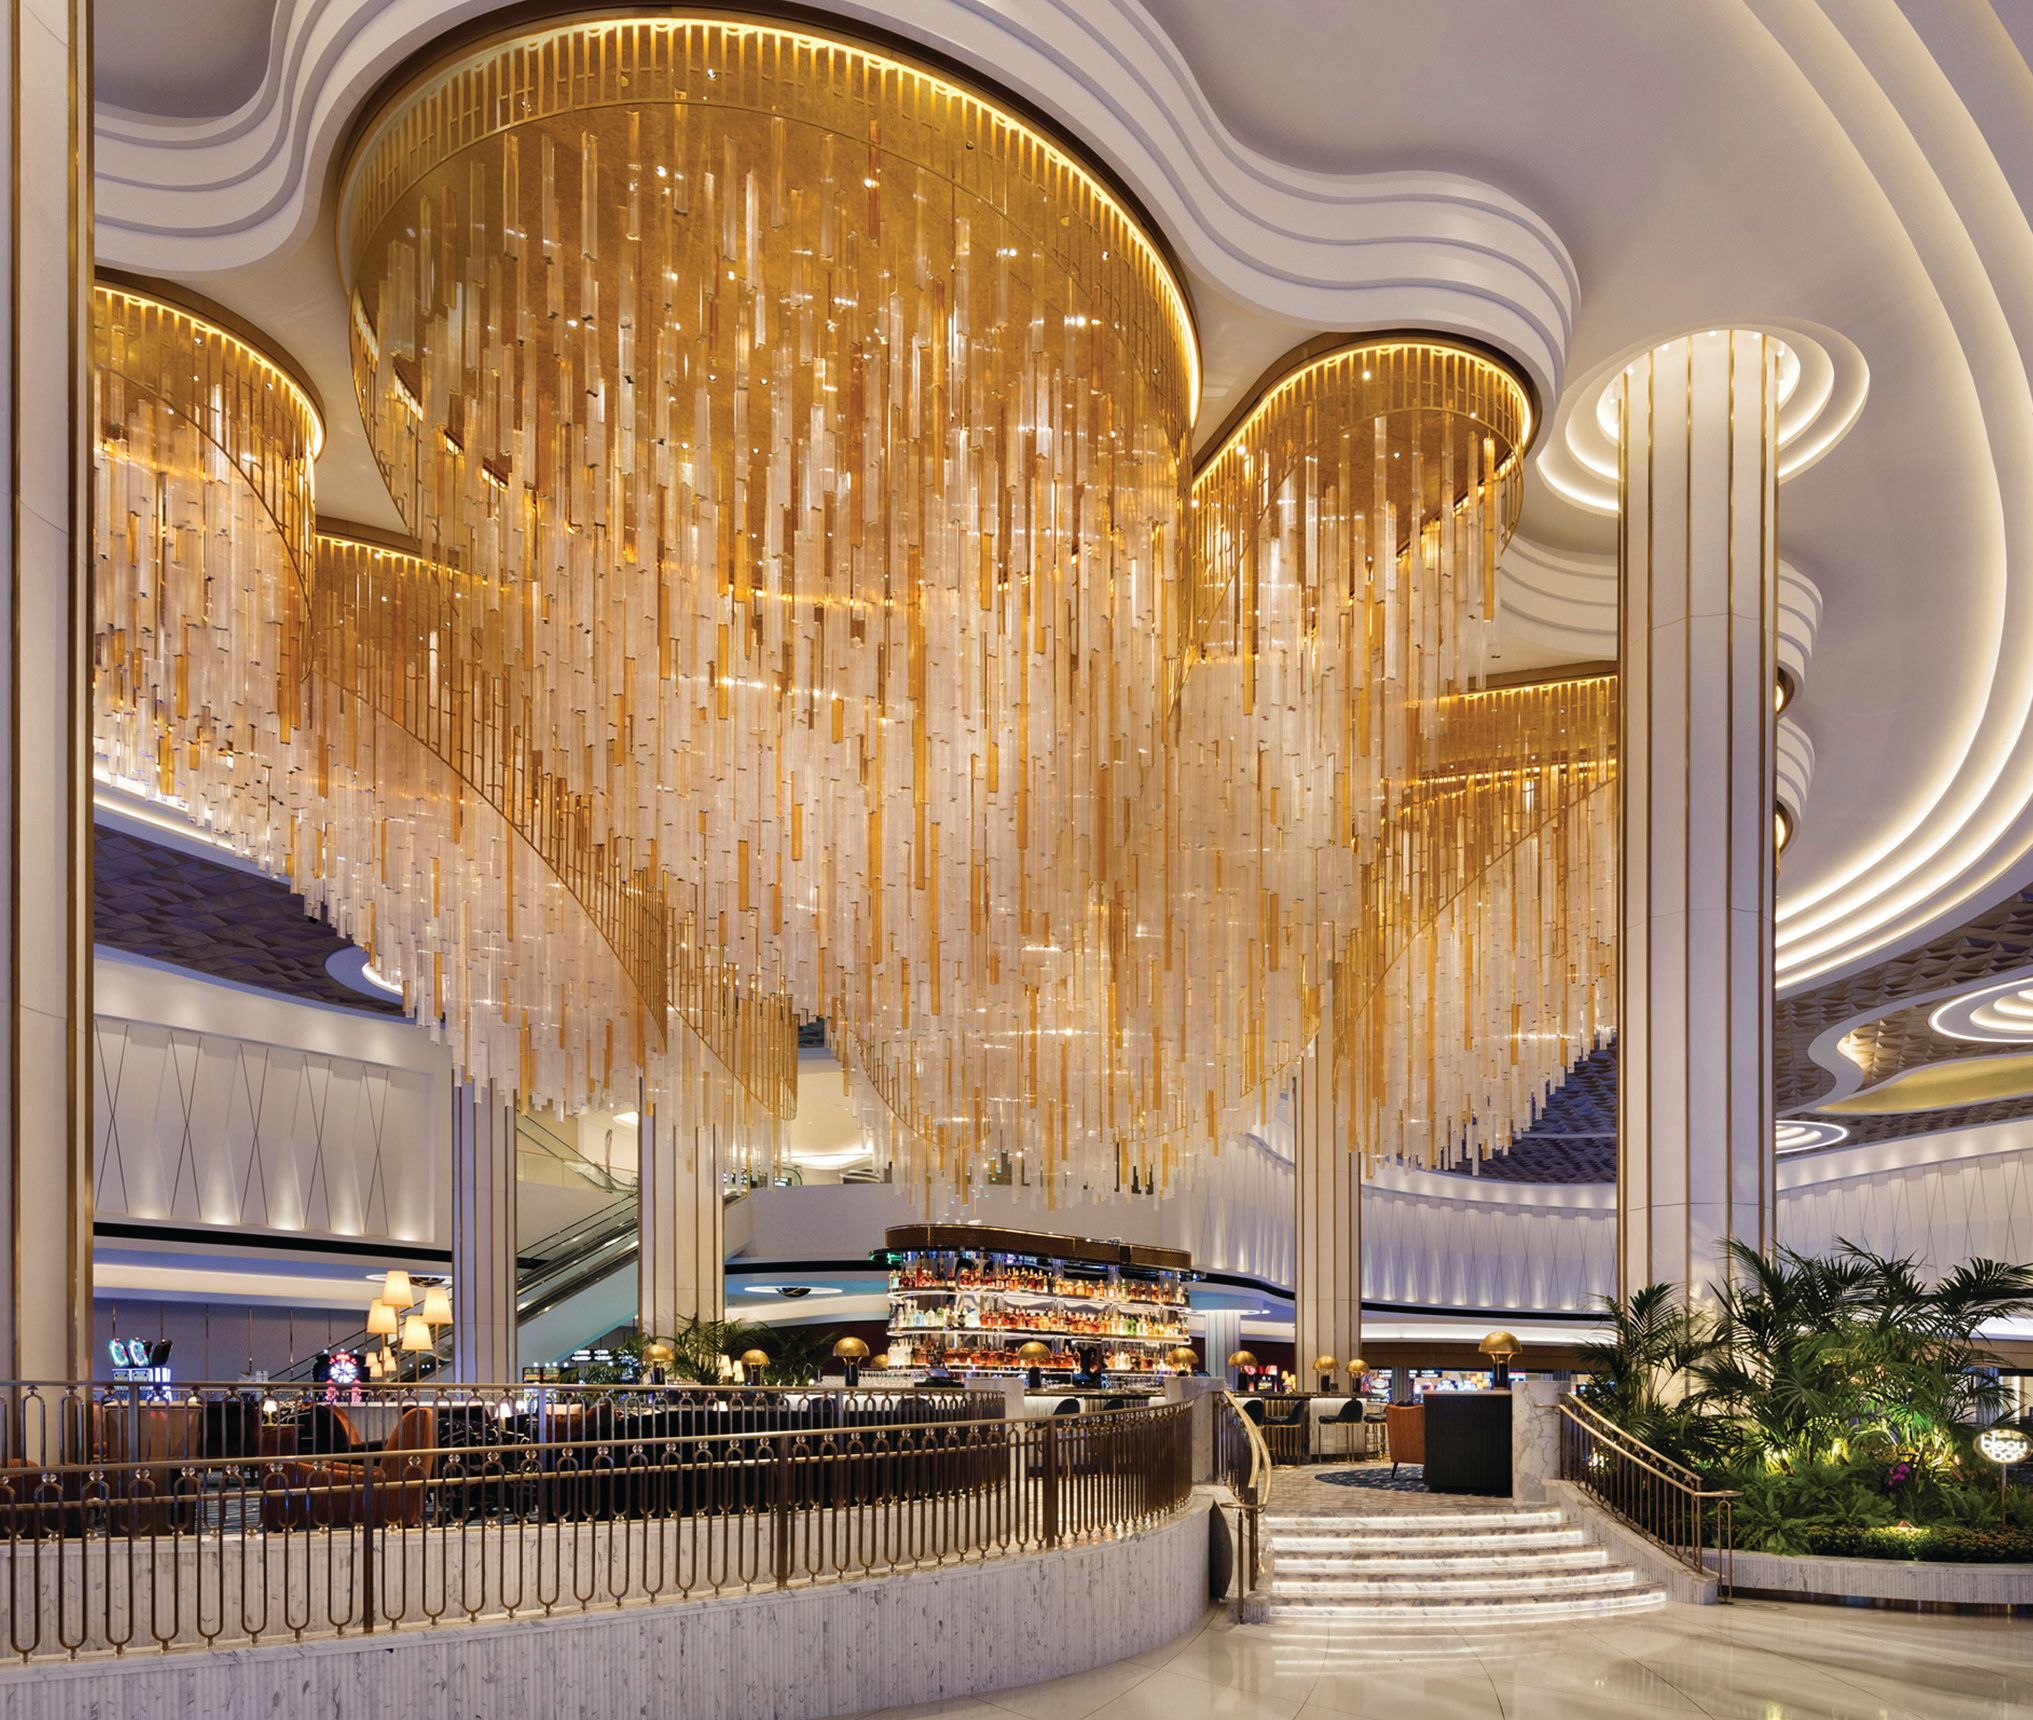 The beautiful Bleau Bar at Fontainebleau Las Vegas serves as the focal point of the casino floor. Its gilded chandelier features the resort’s signature bow tie motif at the bottom of each hanging column. PHOTO BY CONNIE ZHOU